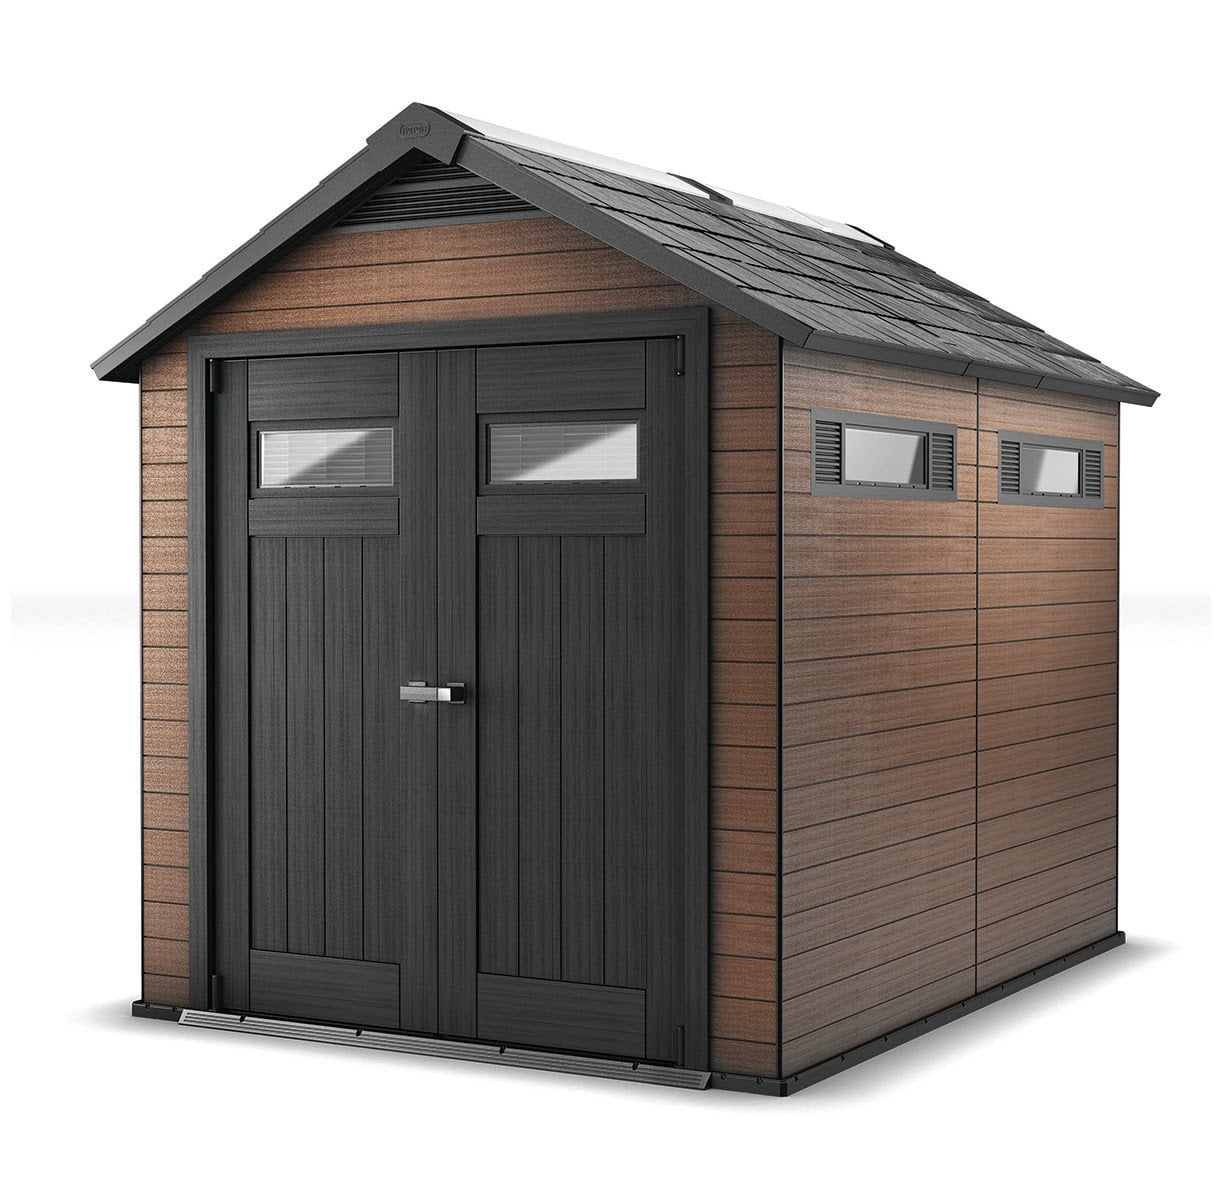 Wood & Plastic Outdoor Yard Garden Composite Storage Shed Keter Fusion Large 7.5 x 9 ft 